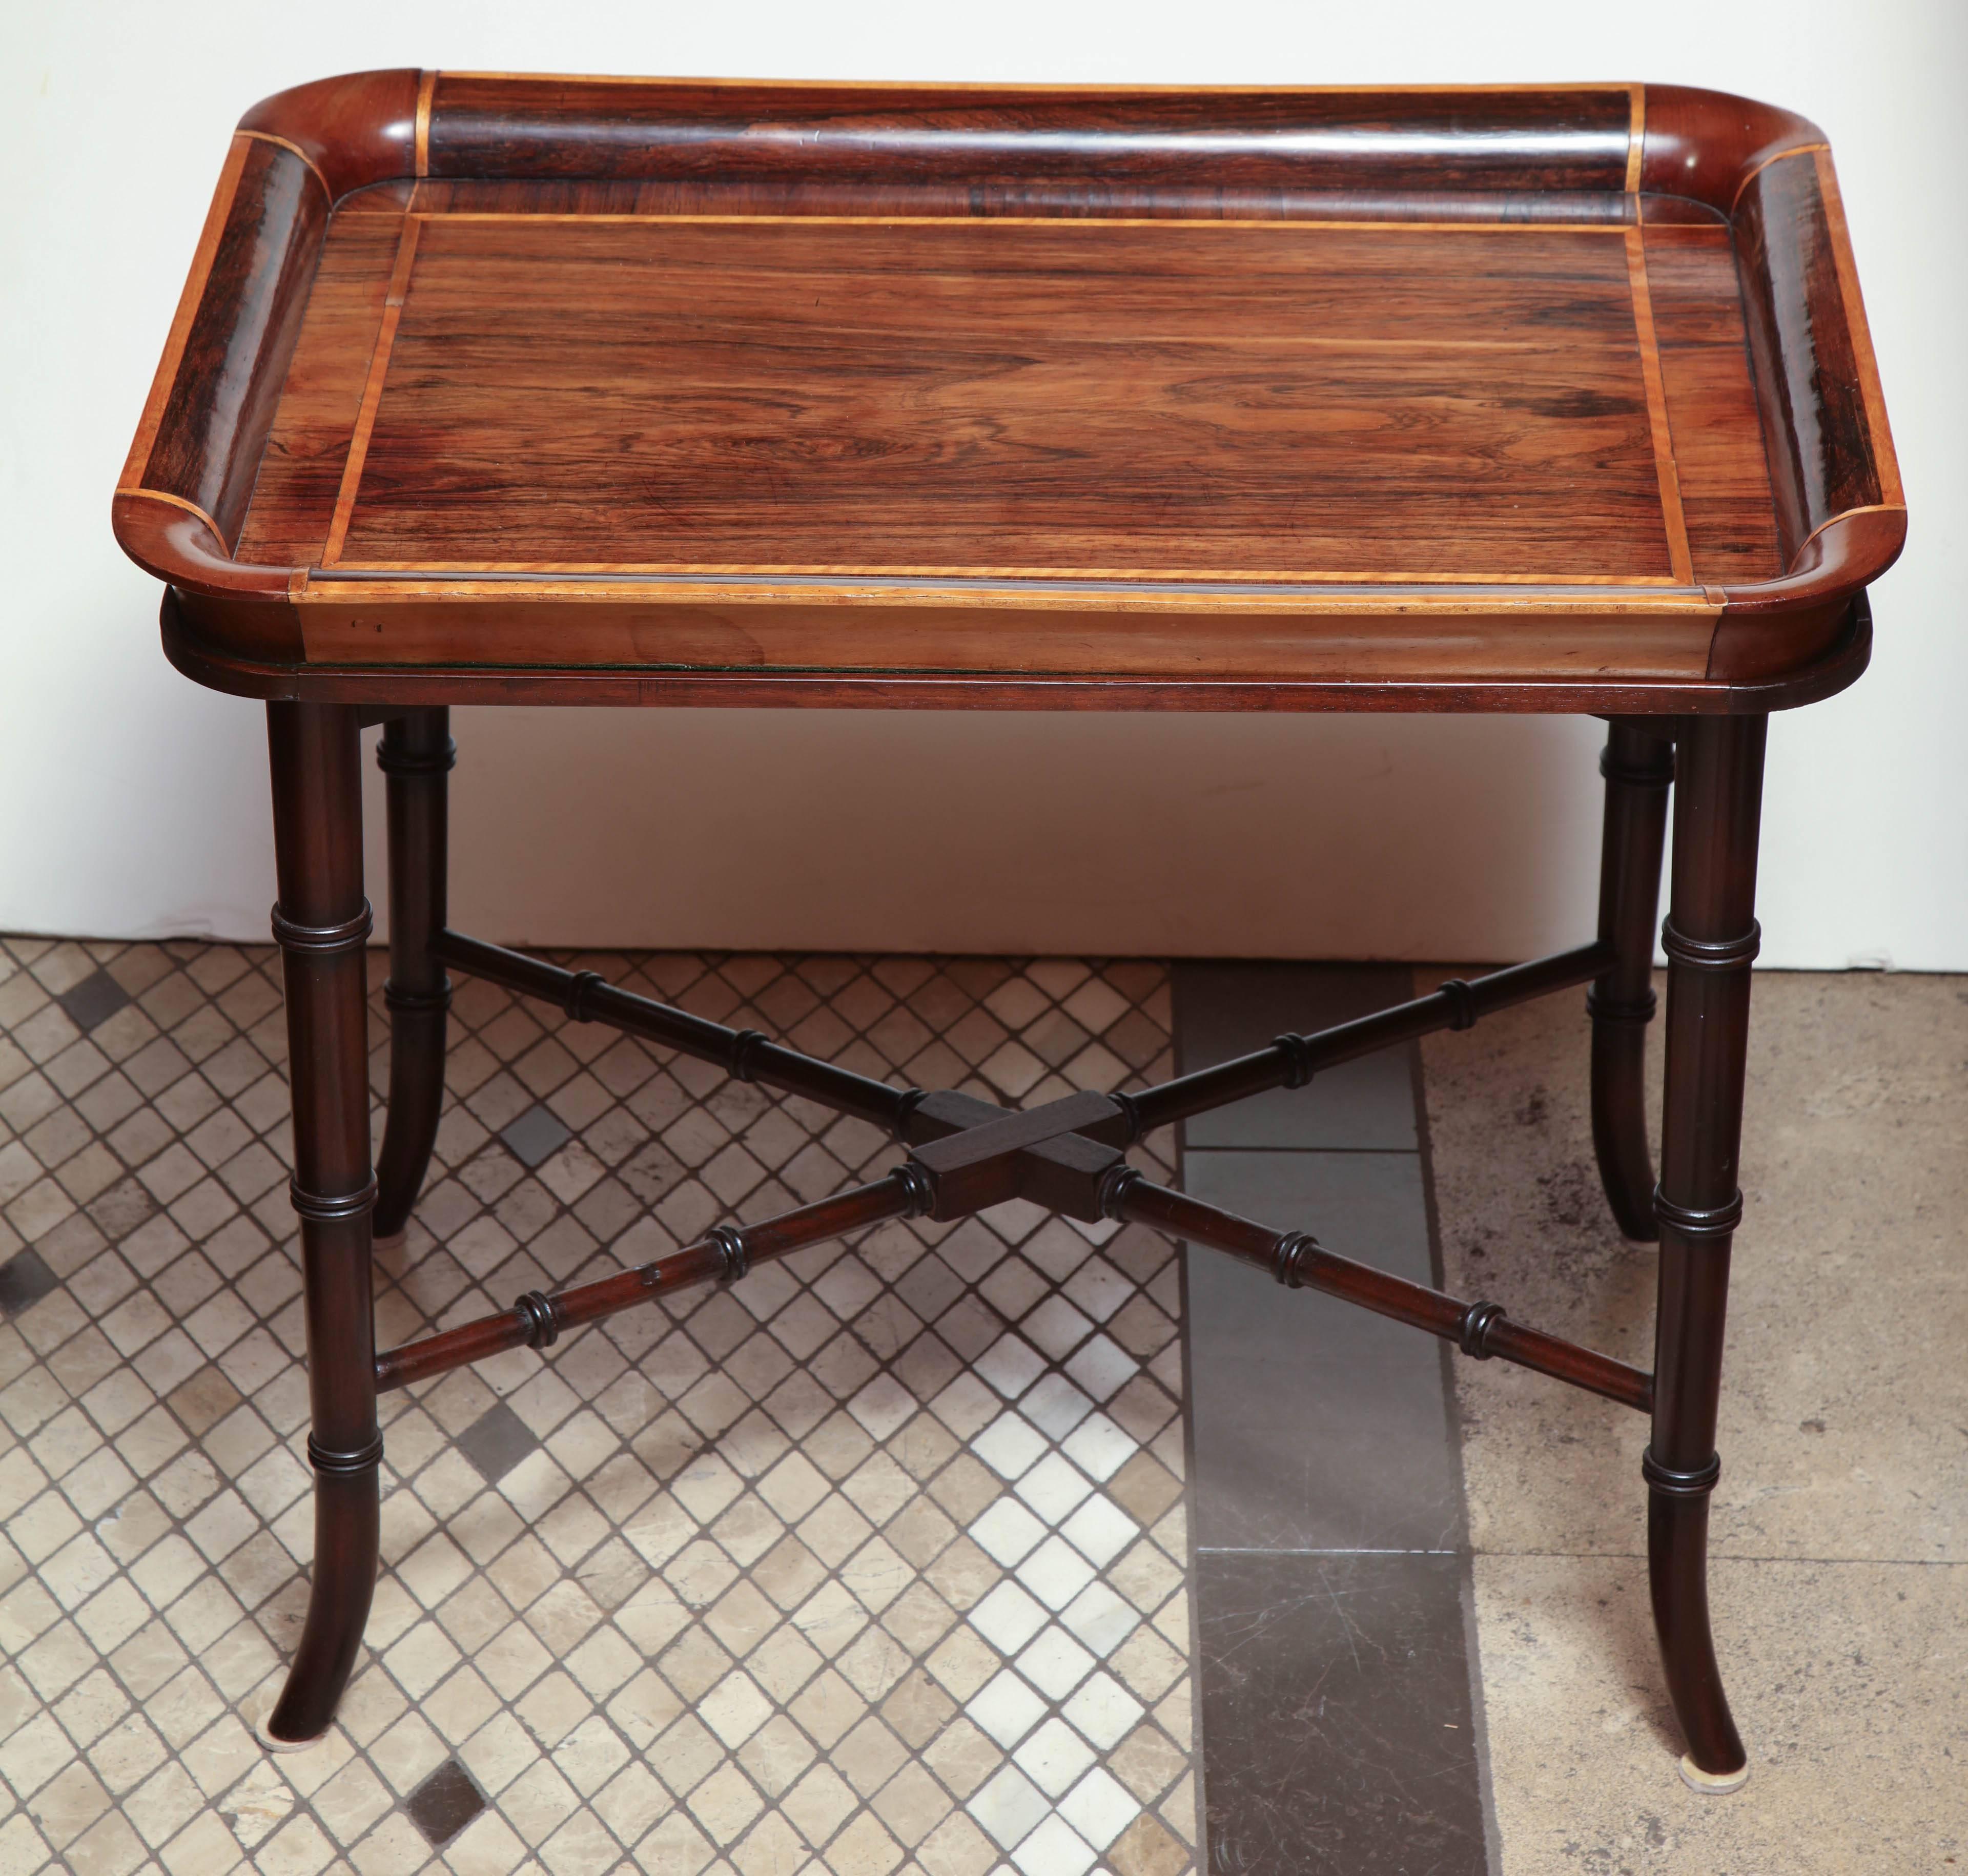 An unusual English late Regency style rosewood tray top coffee table on a later faux bamboo stand with a X stretcher.